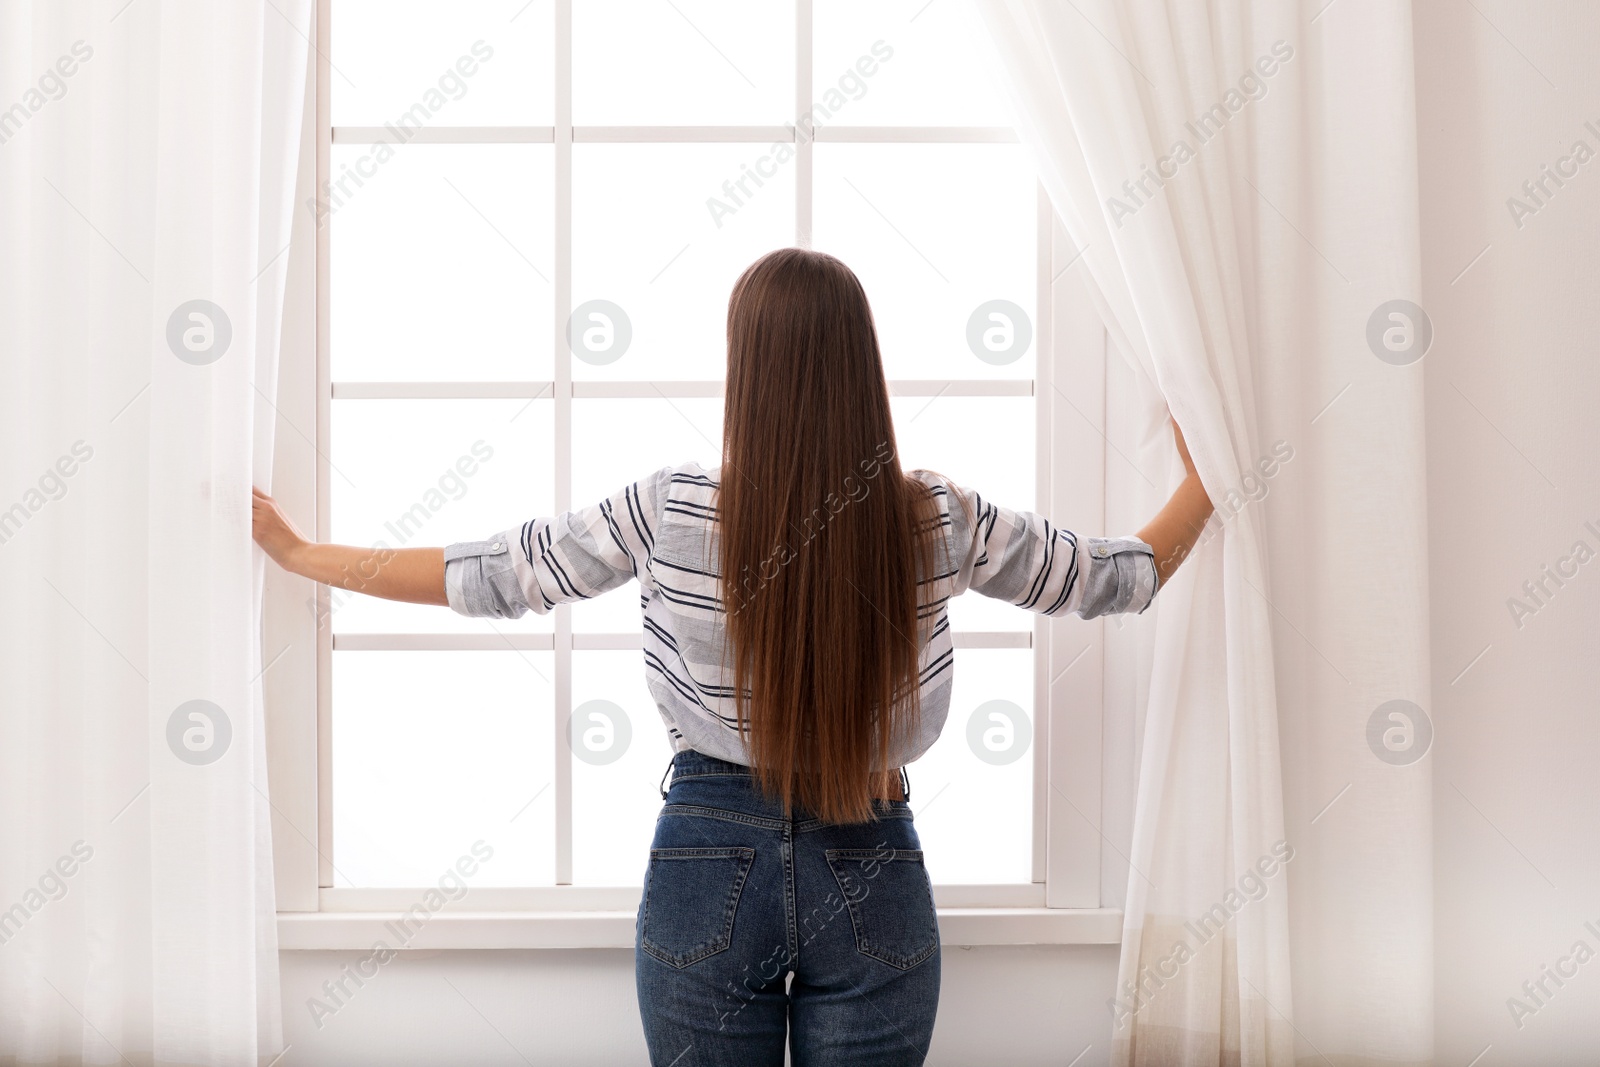 Photo of Young woman opening window curtains at home